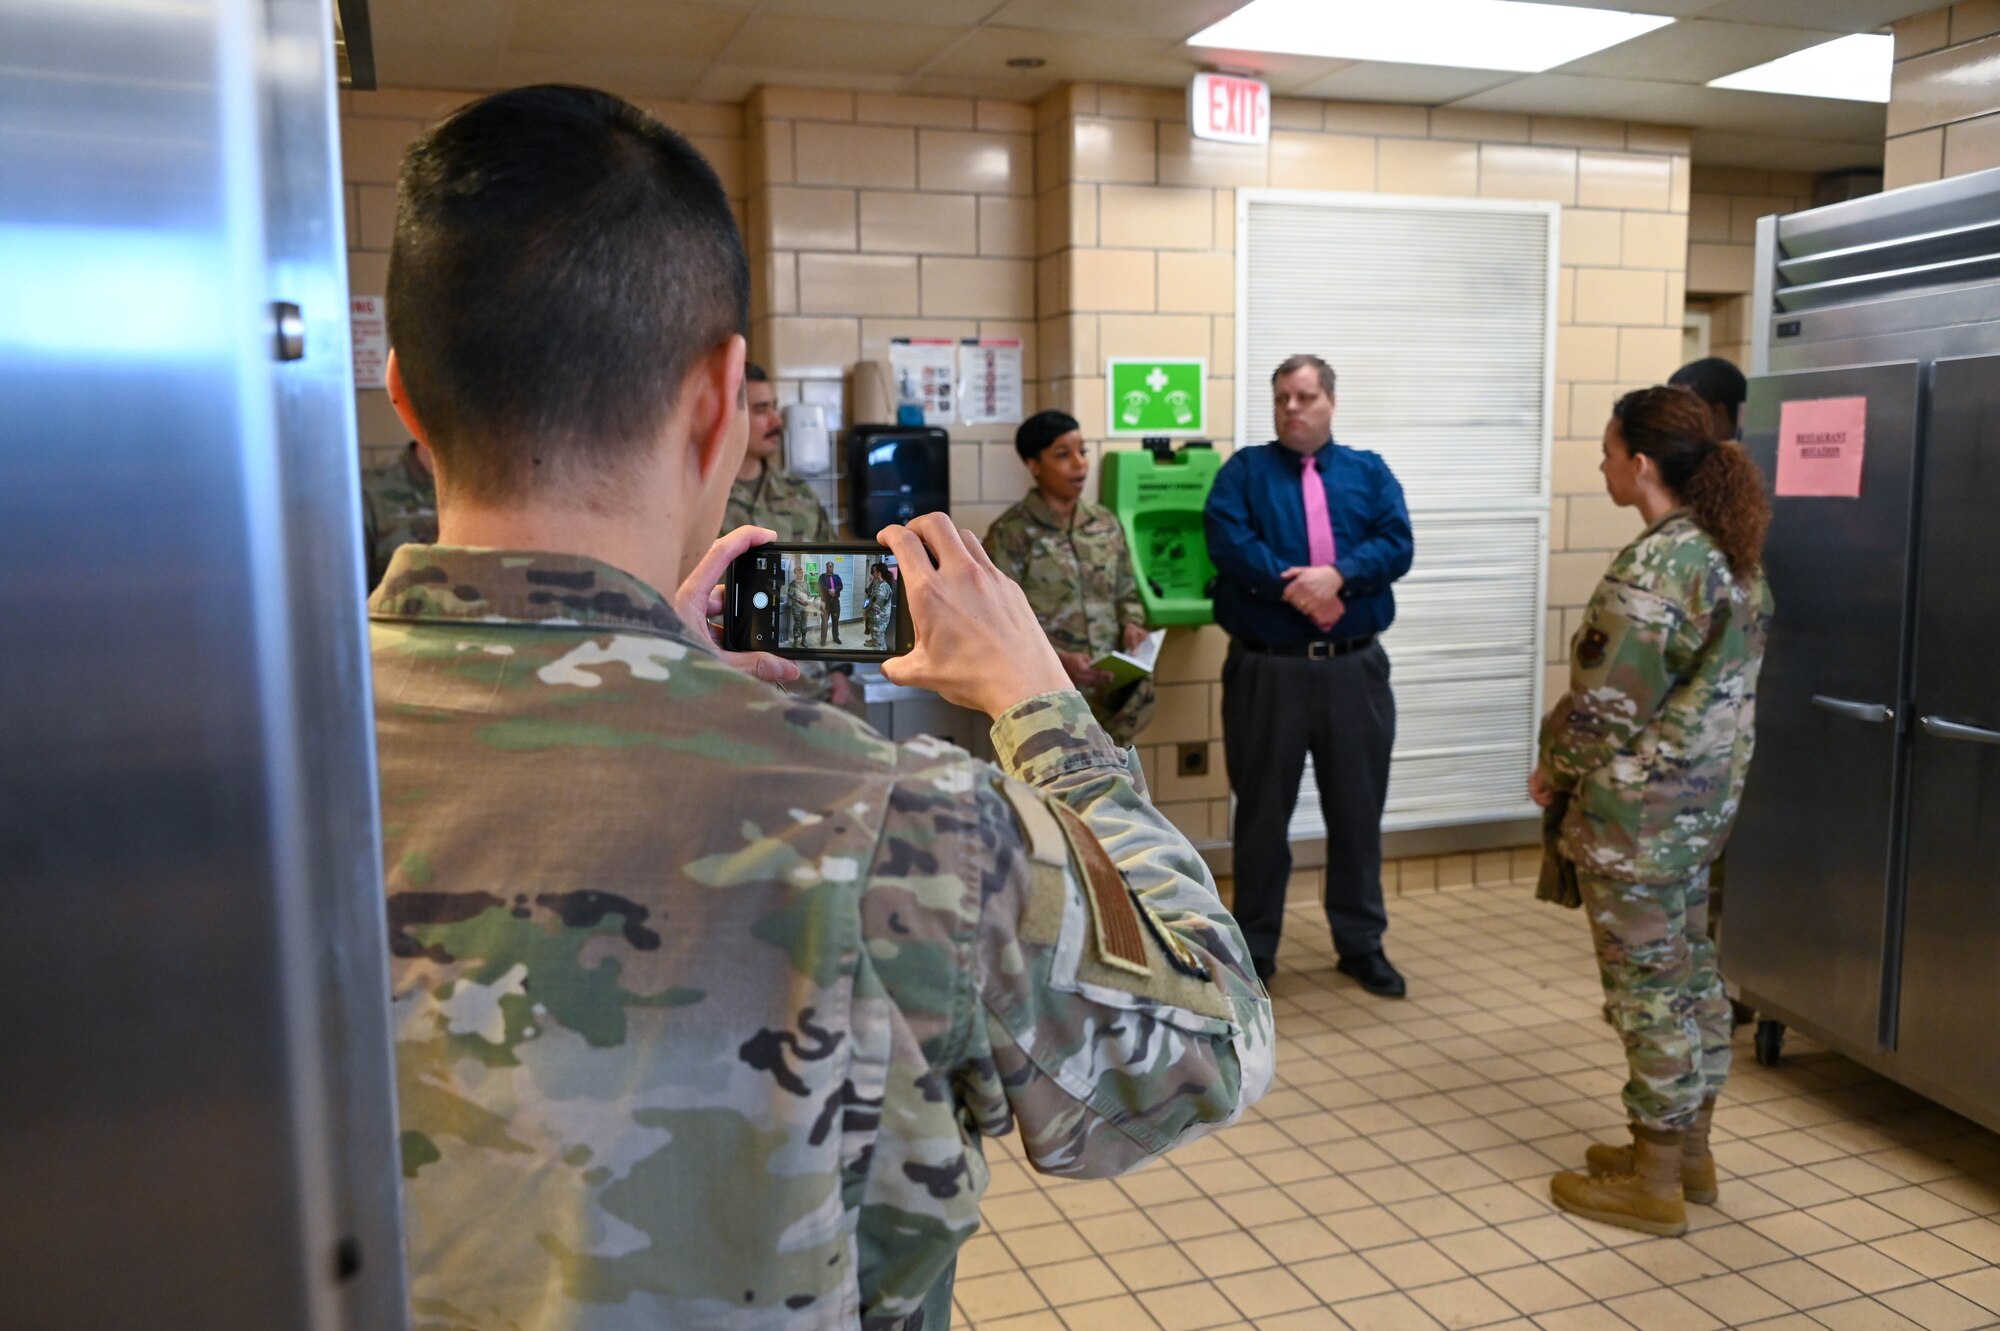 U.S. Air Force Maj. Timothy Truong, 97th Logistics Readiness Squadron deputy officer, takes a photo of Chief Master Sgt. Kristina Rogers, 19th Air Force command chief, talking with Airmen at Altus Air Force Base (AAFB), Oklahoma, March 31, 2022. Rogers toured the recently renovated dining facility at AAFB after viewing the newly built dorms. (U.S. Air Force photo by Senior Airman Kayla Christenson)